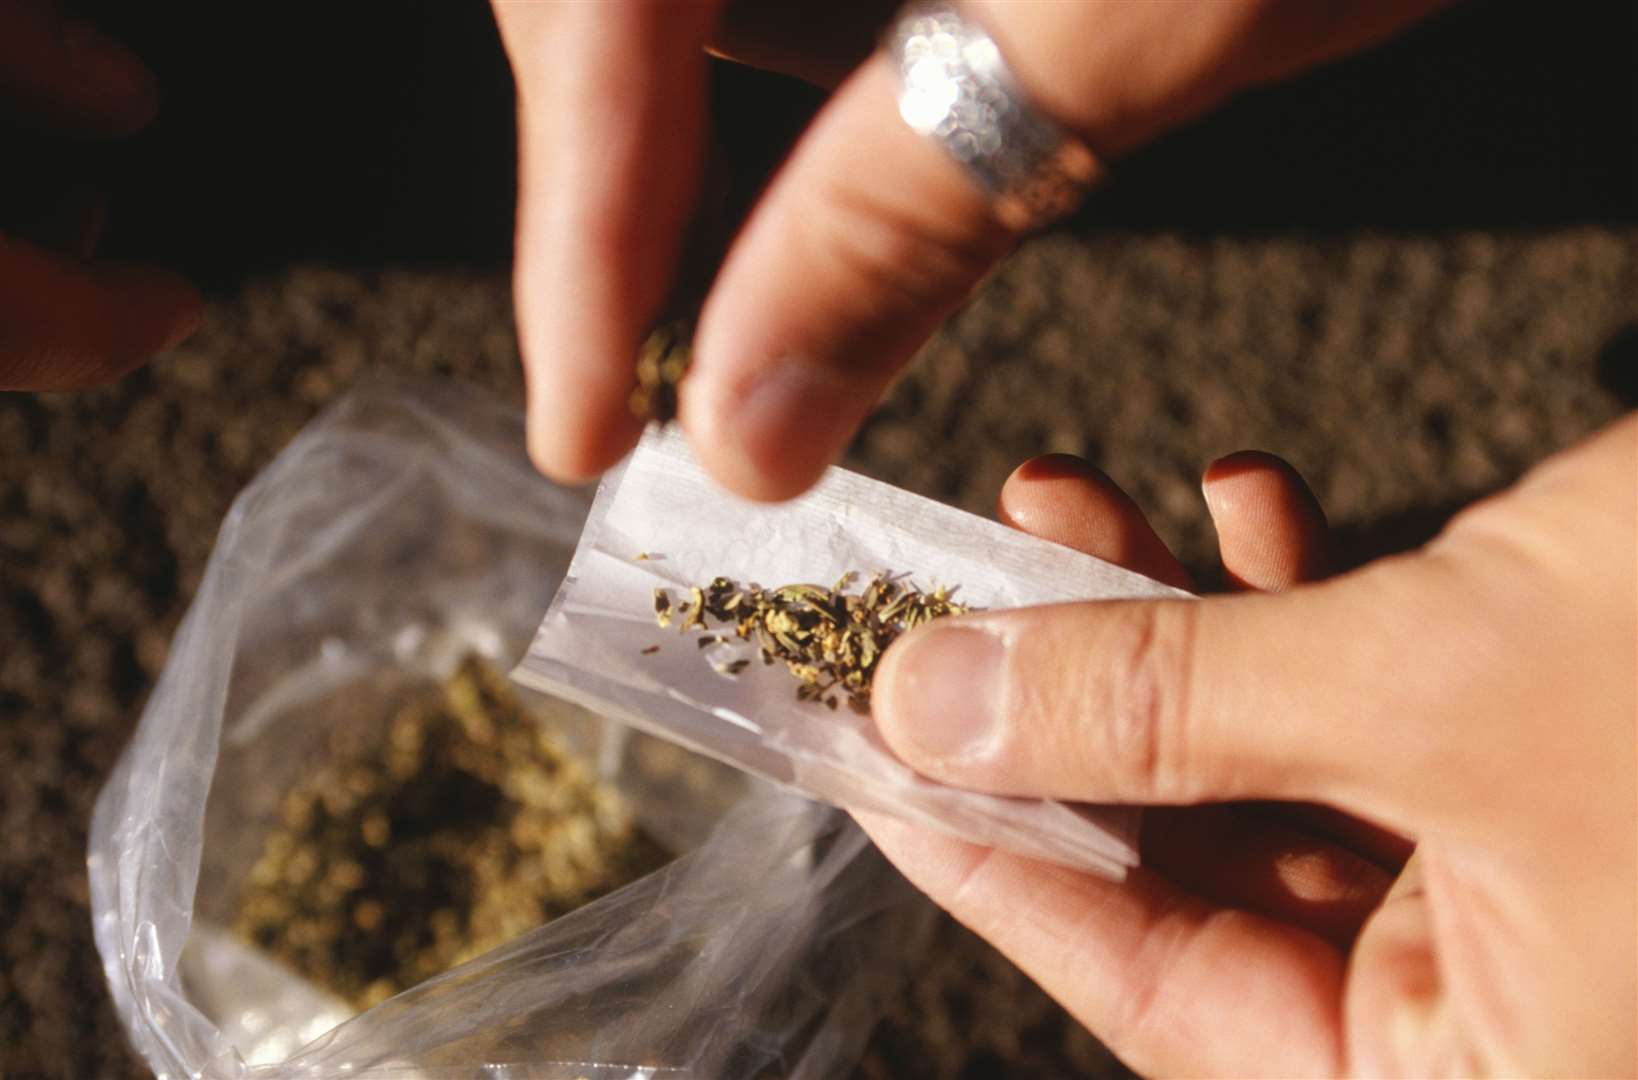 Richard Edwards, 43, was stopped and officers found cannabis bag deals and a small amount of cocaine in a bag he was carrying. Image: Thinkstock Image Library